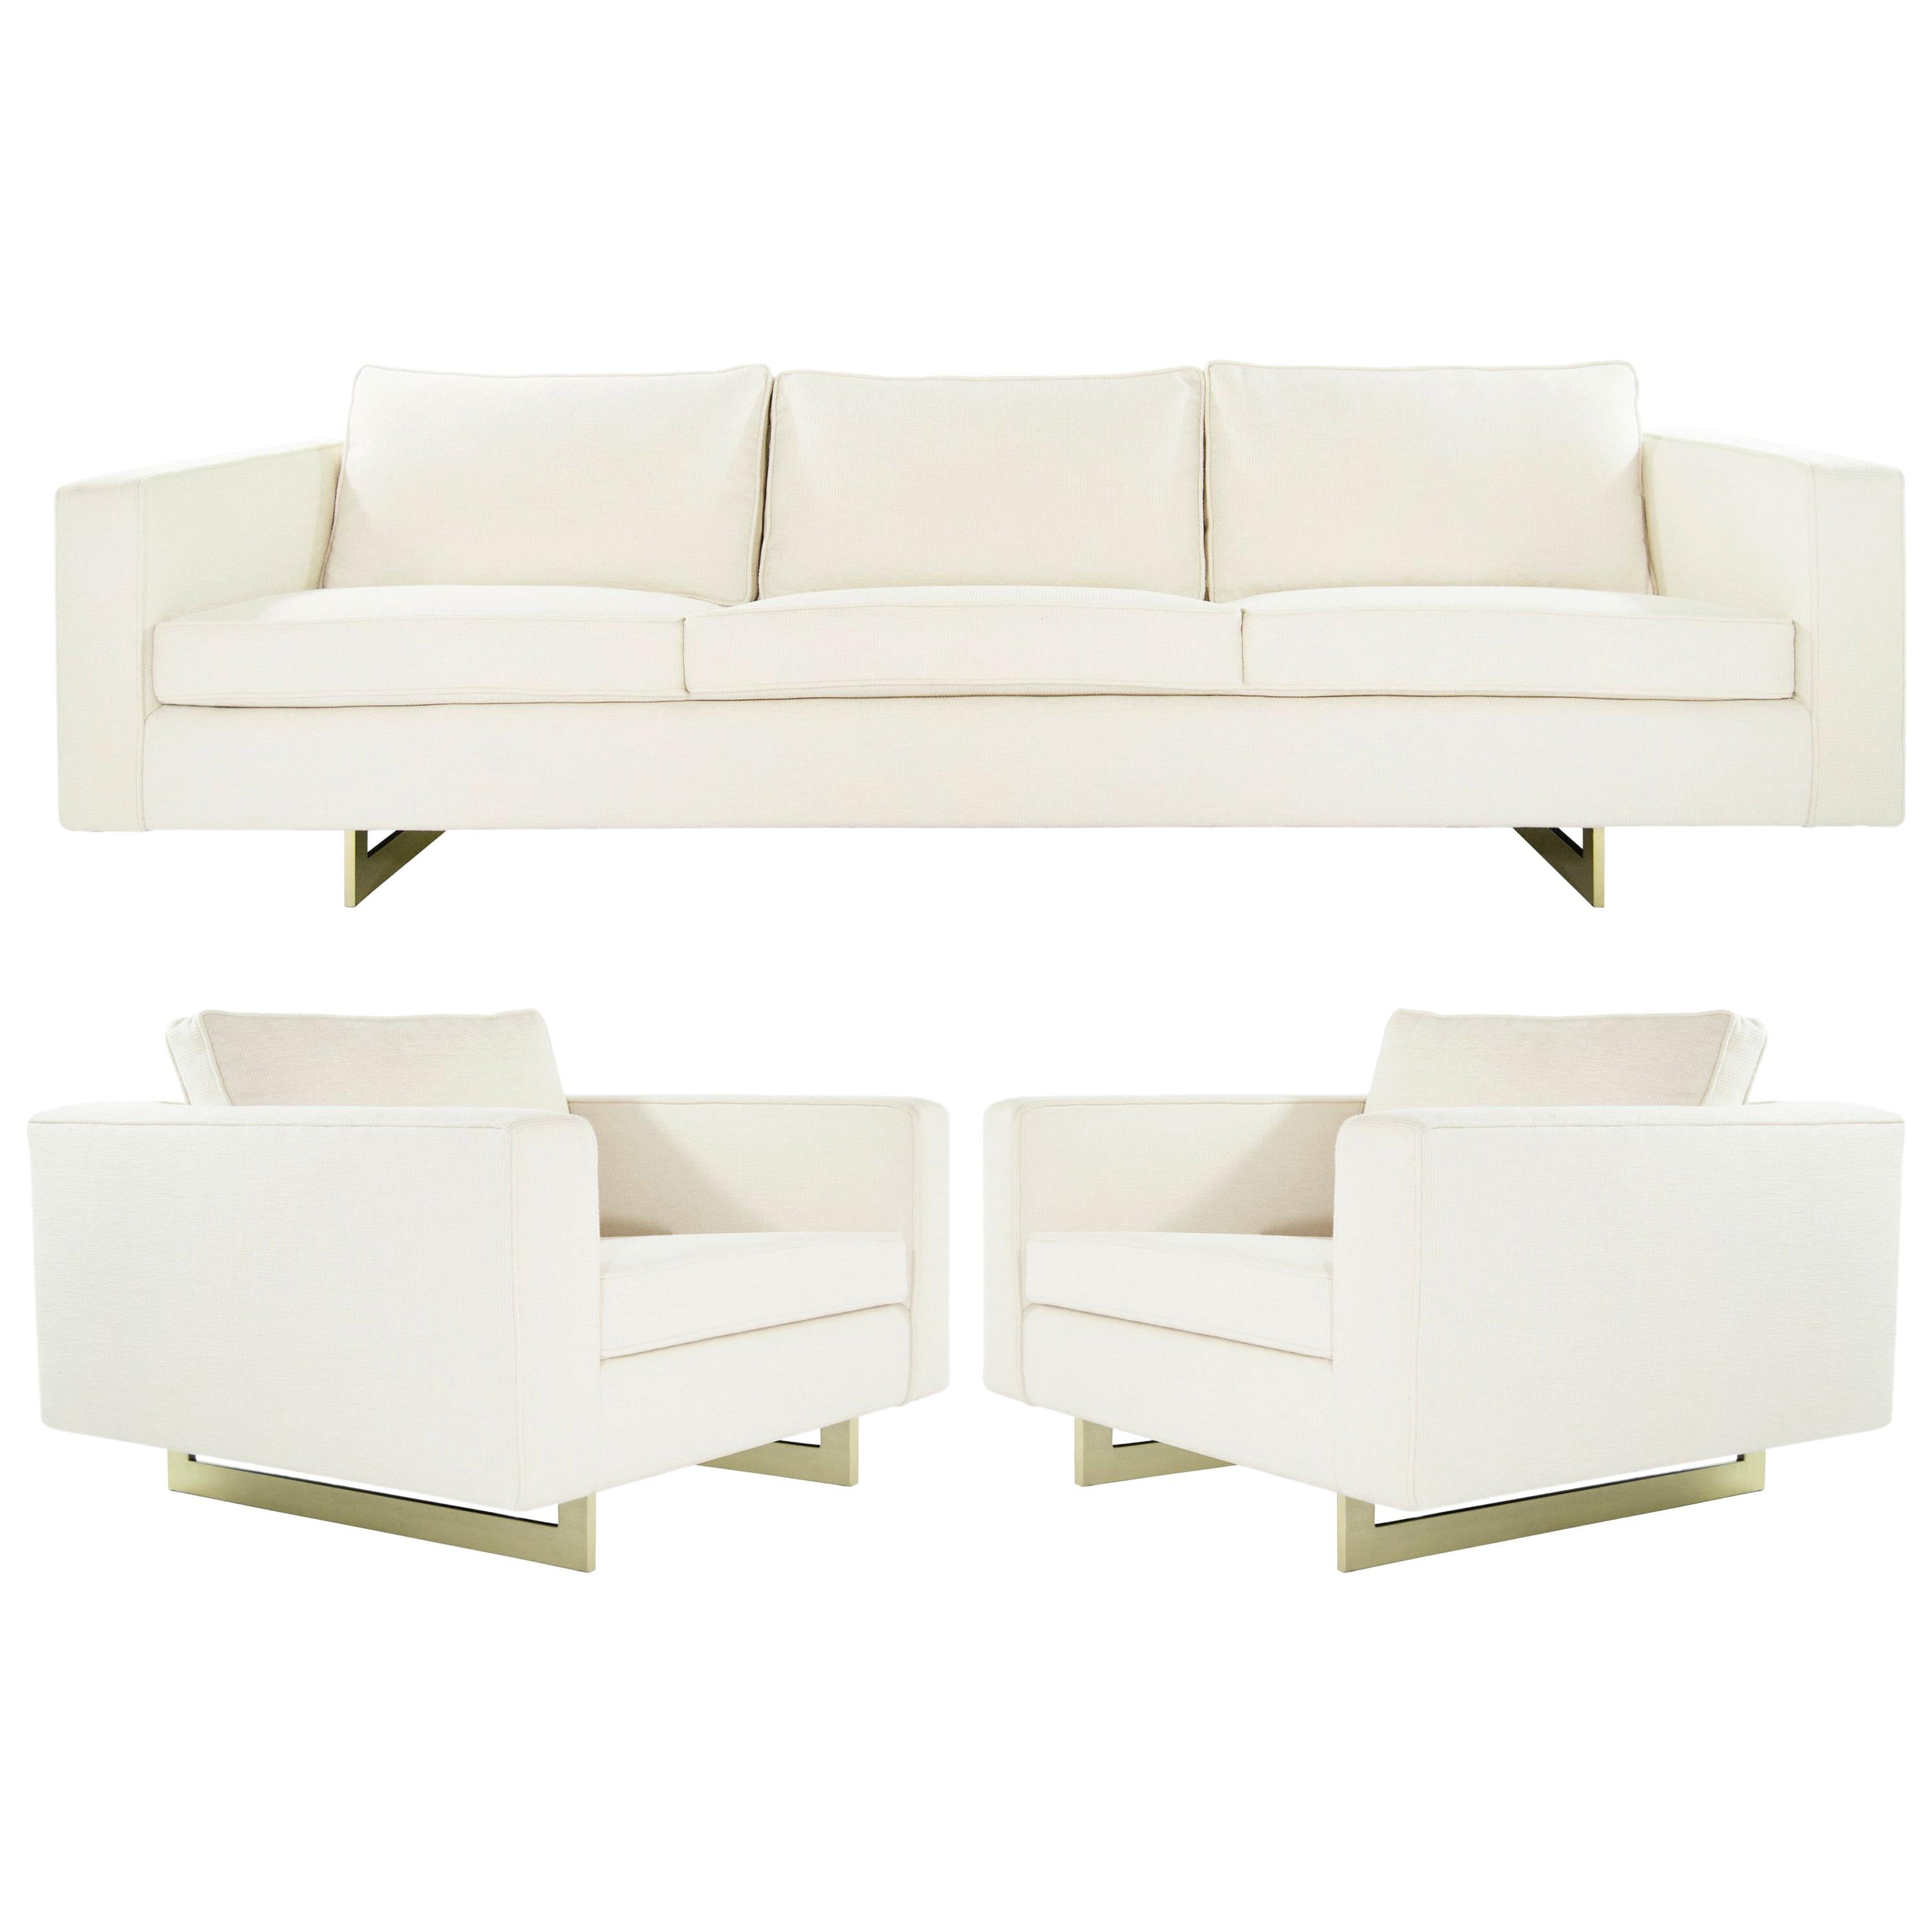 Important Series 65 Sofa and Lounge Chairs Set by Jens Risom, circa 1960s